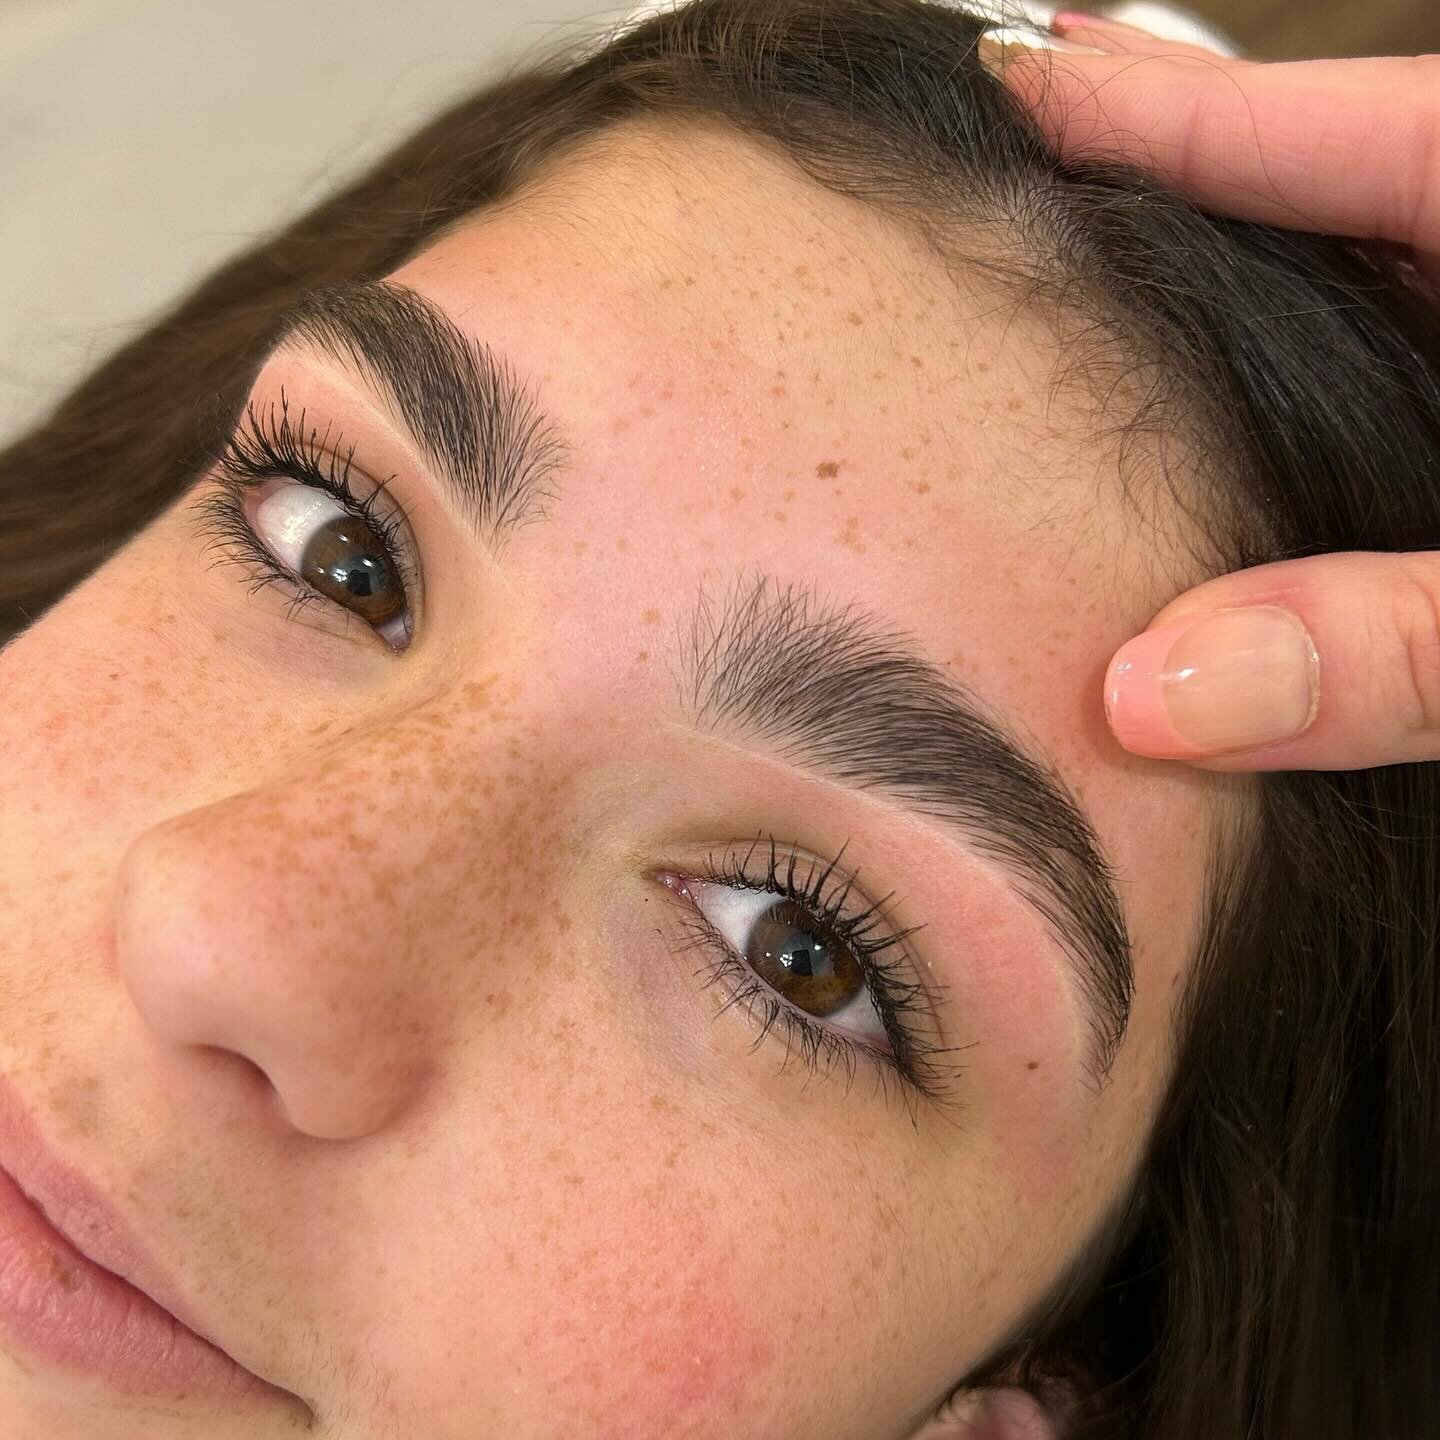 Brow Shaping w/ highlight for this beauty🧚🏼✨

Prebook your vday wax💌 link in bio

#browshaping #jaxbrows #browartist #italwax #trending #stjohns